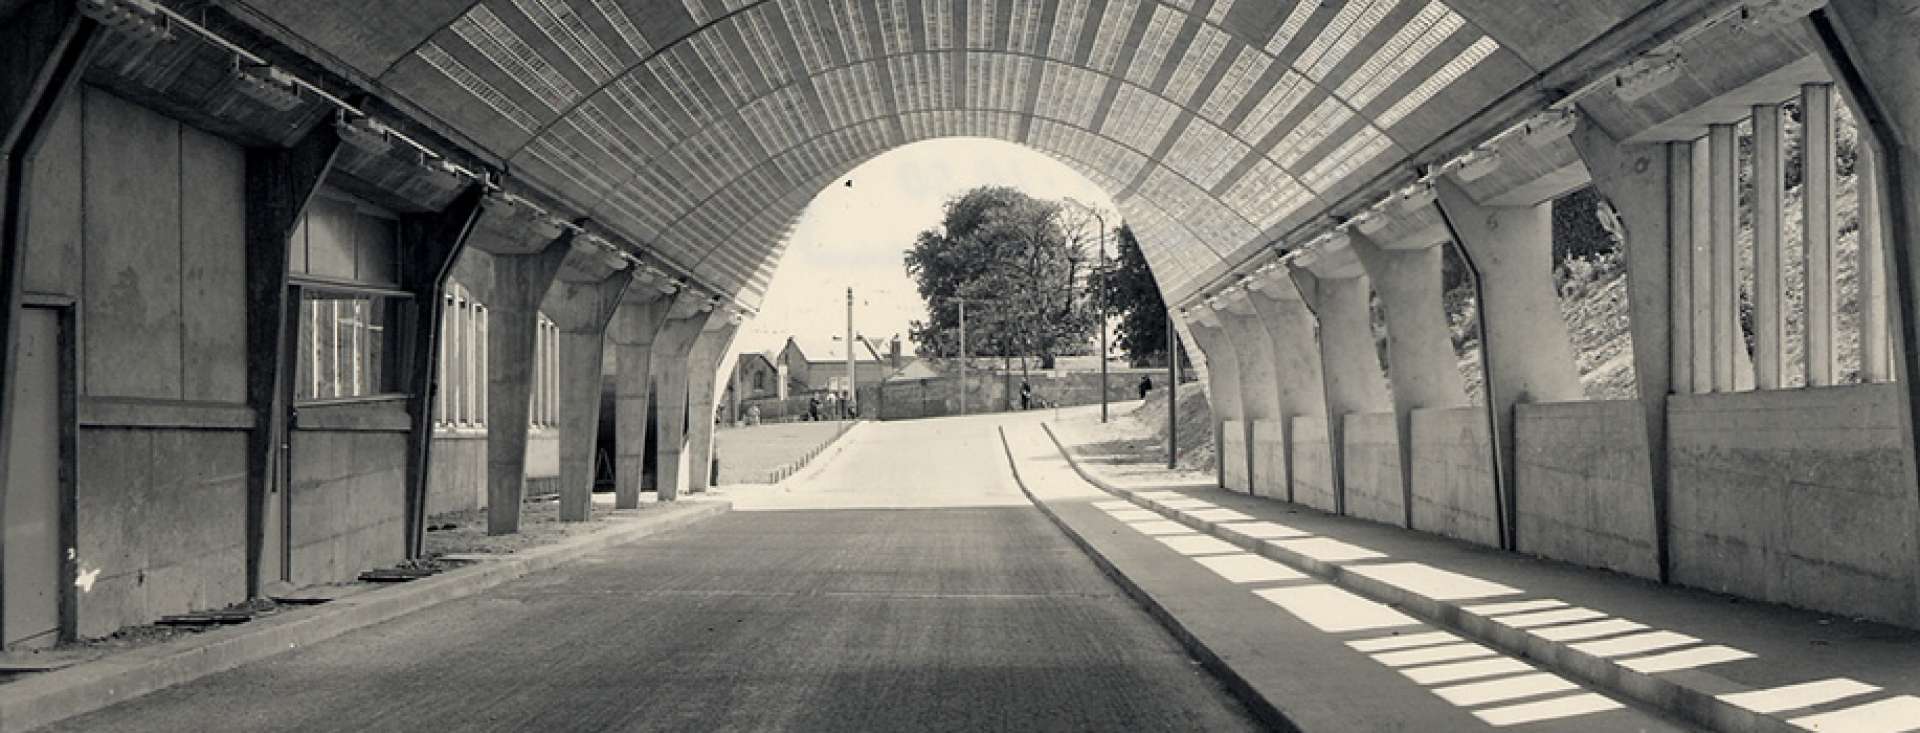 Sortie nord du tunnel Jenner, 1962 (Hauville)